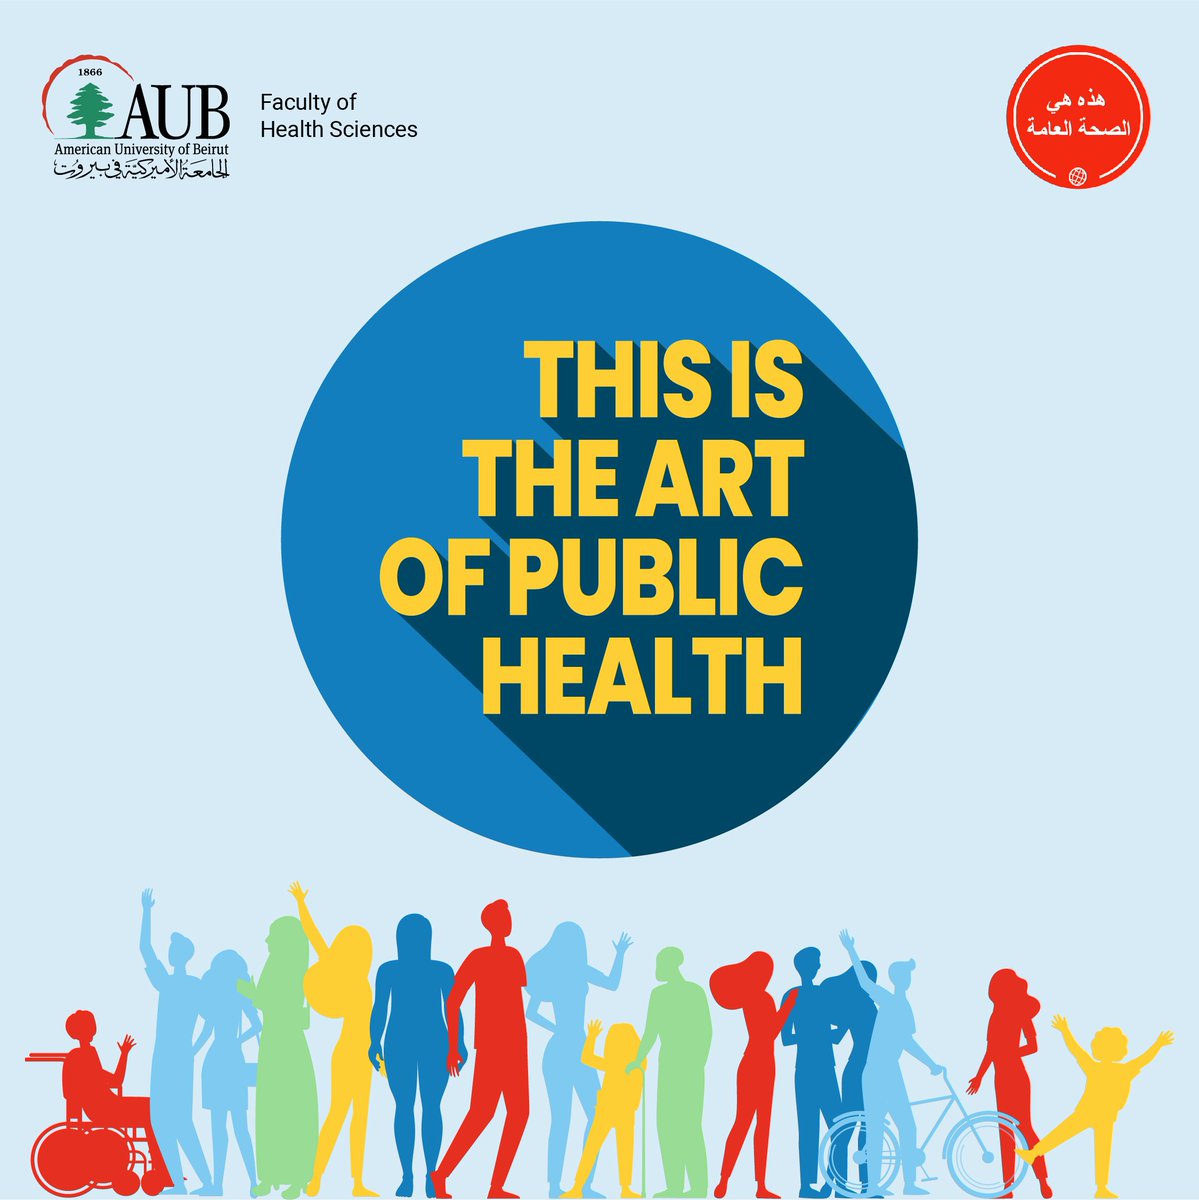 Champions are ordinary people who choose to help others & promote their wellbeing.“This is the Art of #PublicHealth campaign features stories of PH champions from all walks of life. Buckle up & savor the testimonials that are soon to come! @TIPHtweets @ASPPHtweets @AUB_Lebanon